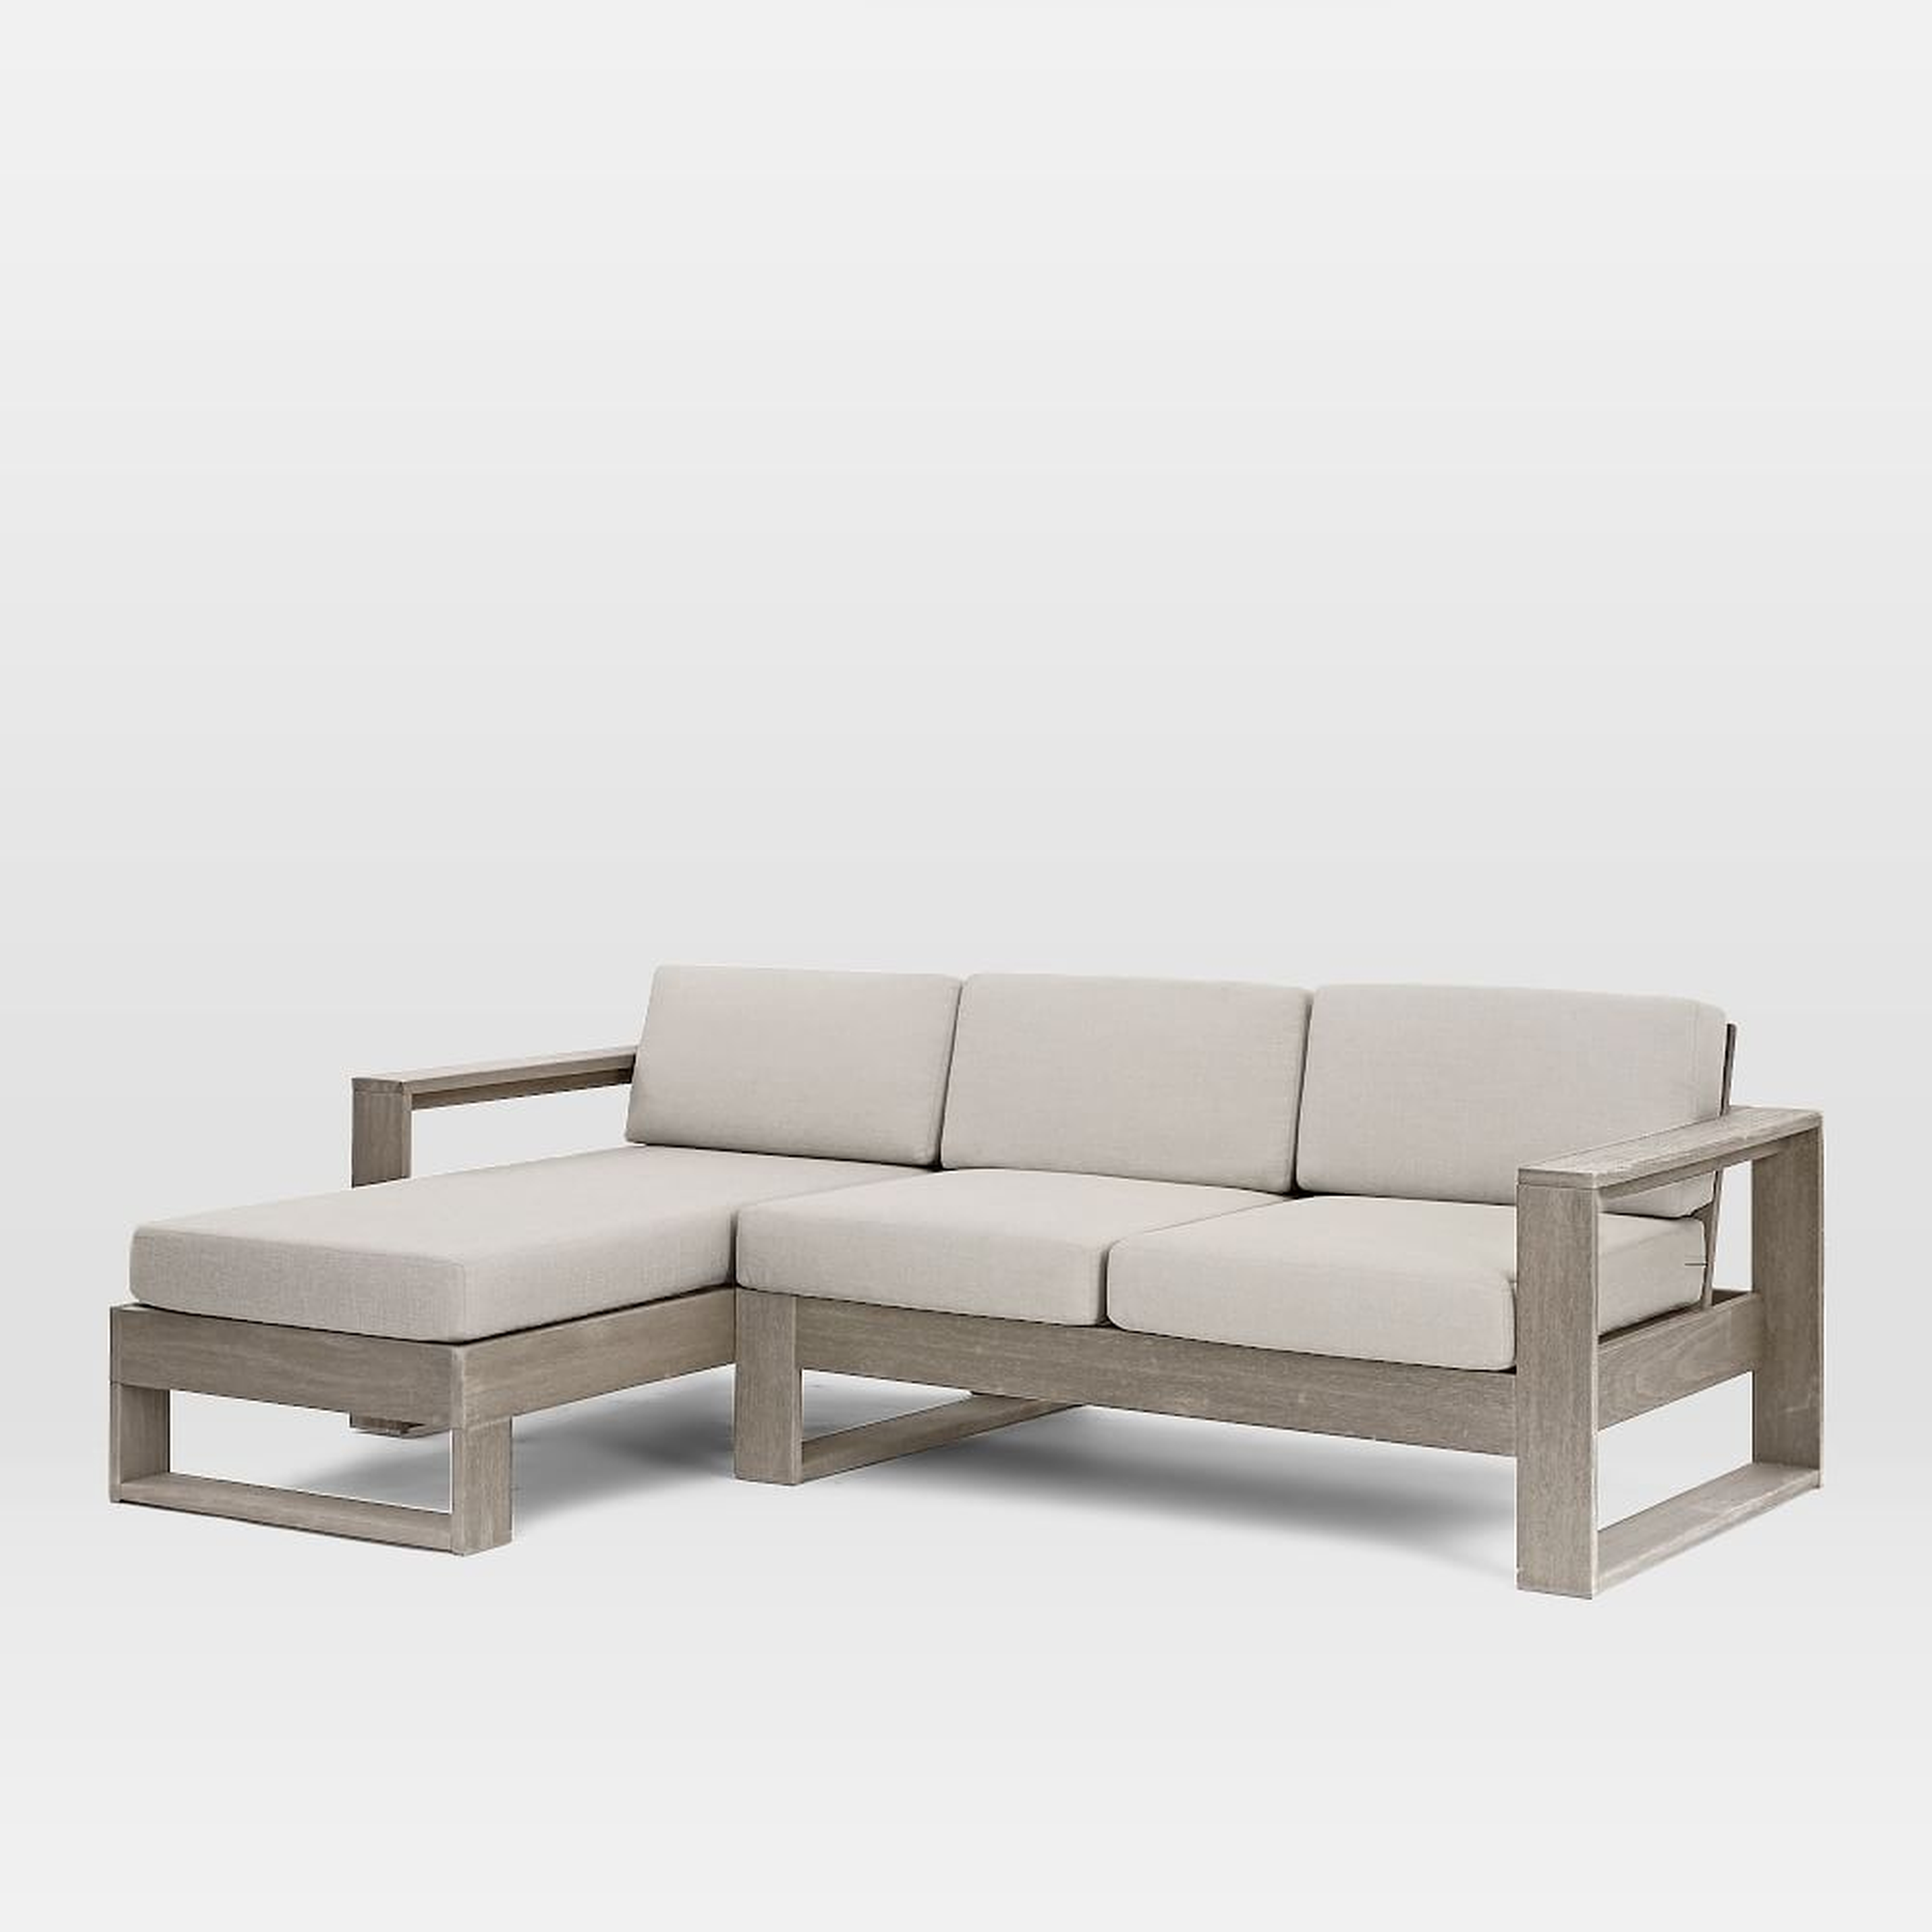 Portside Set 2: Weathered Gray Left Arm Chaise + Right Arm Sofa - West Elm